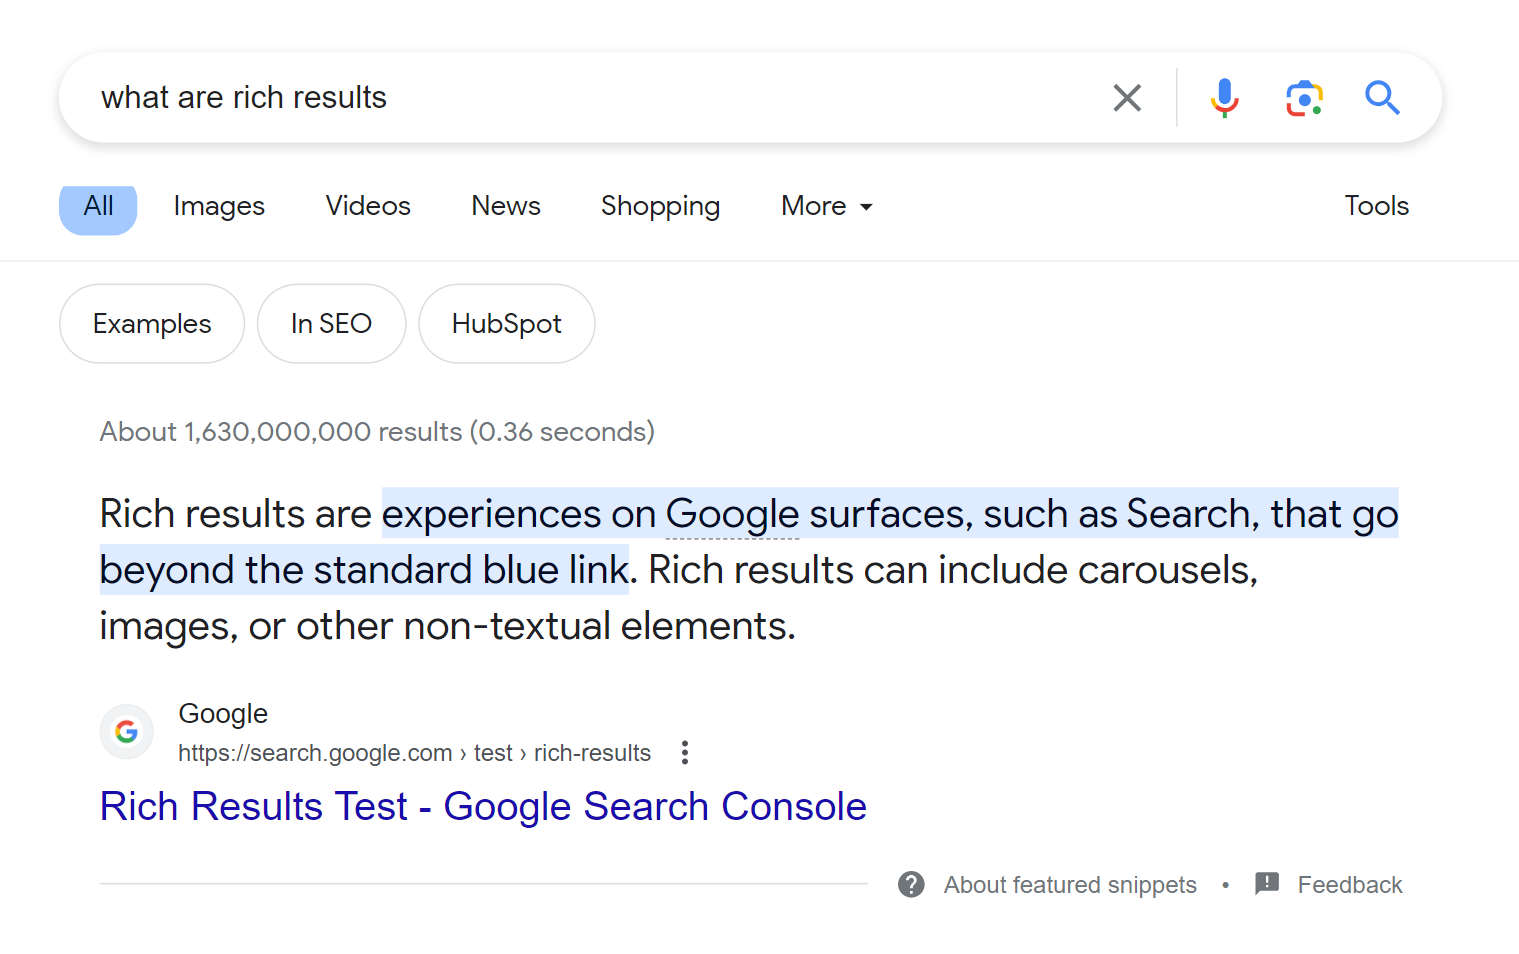 Paragraph Featured Snippets